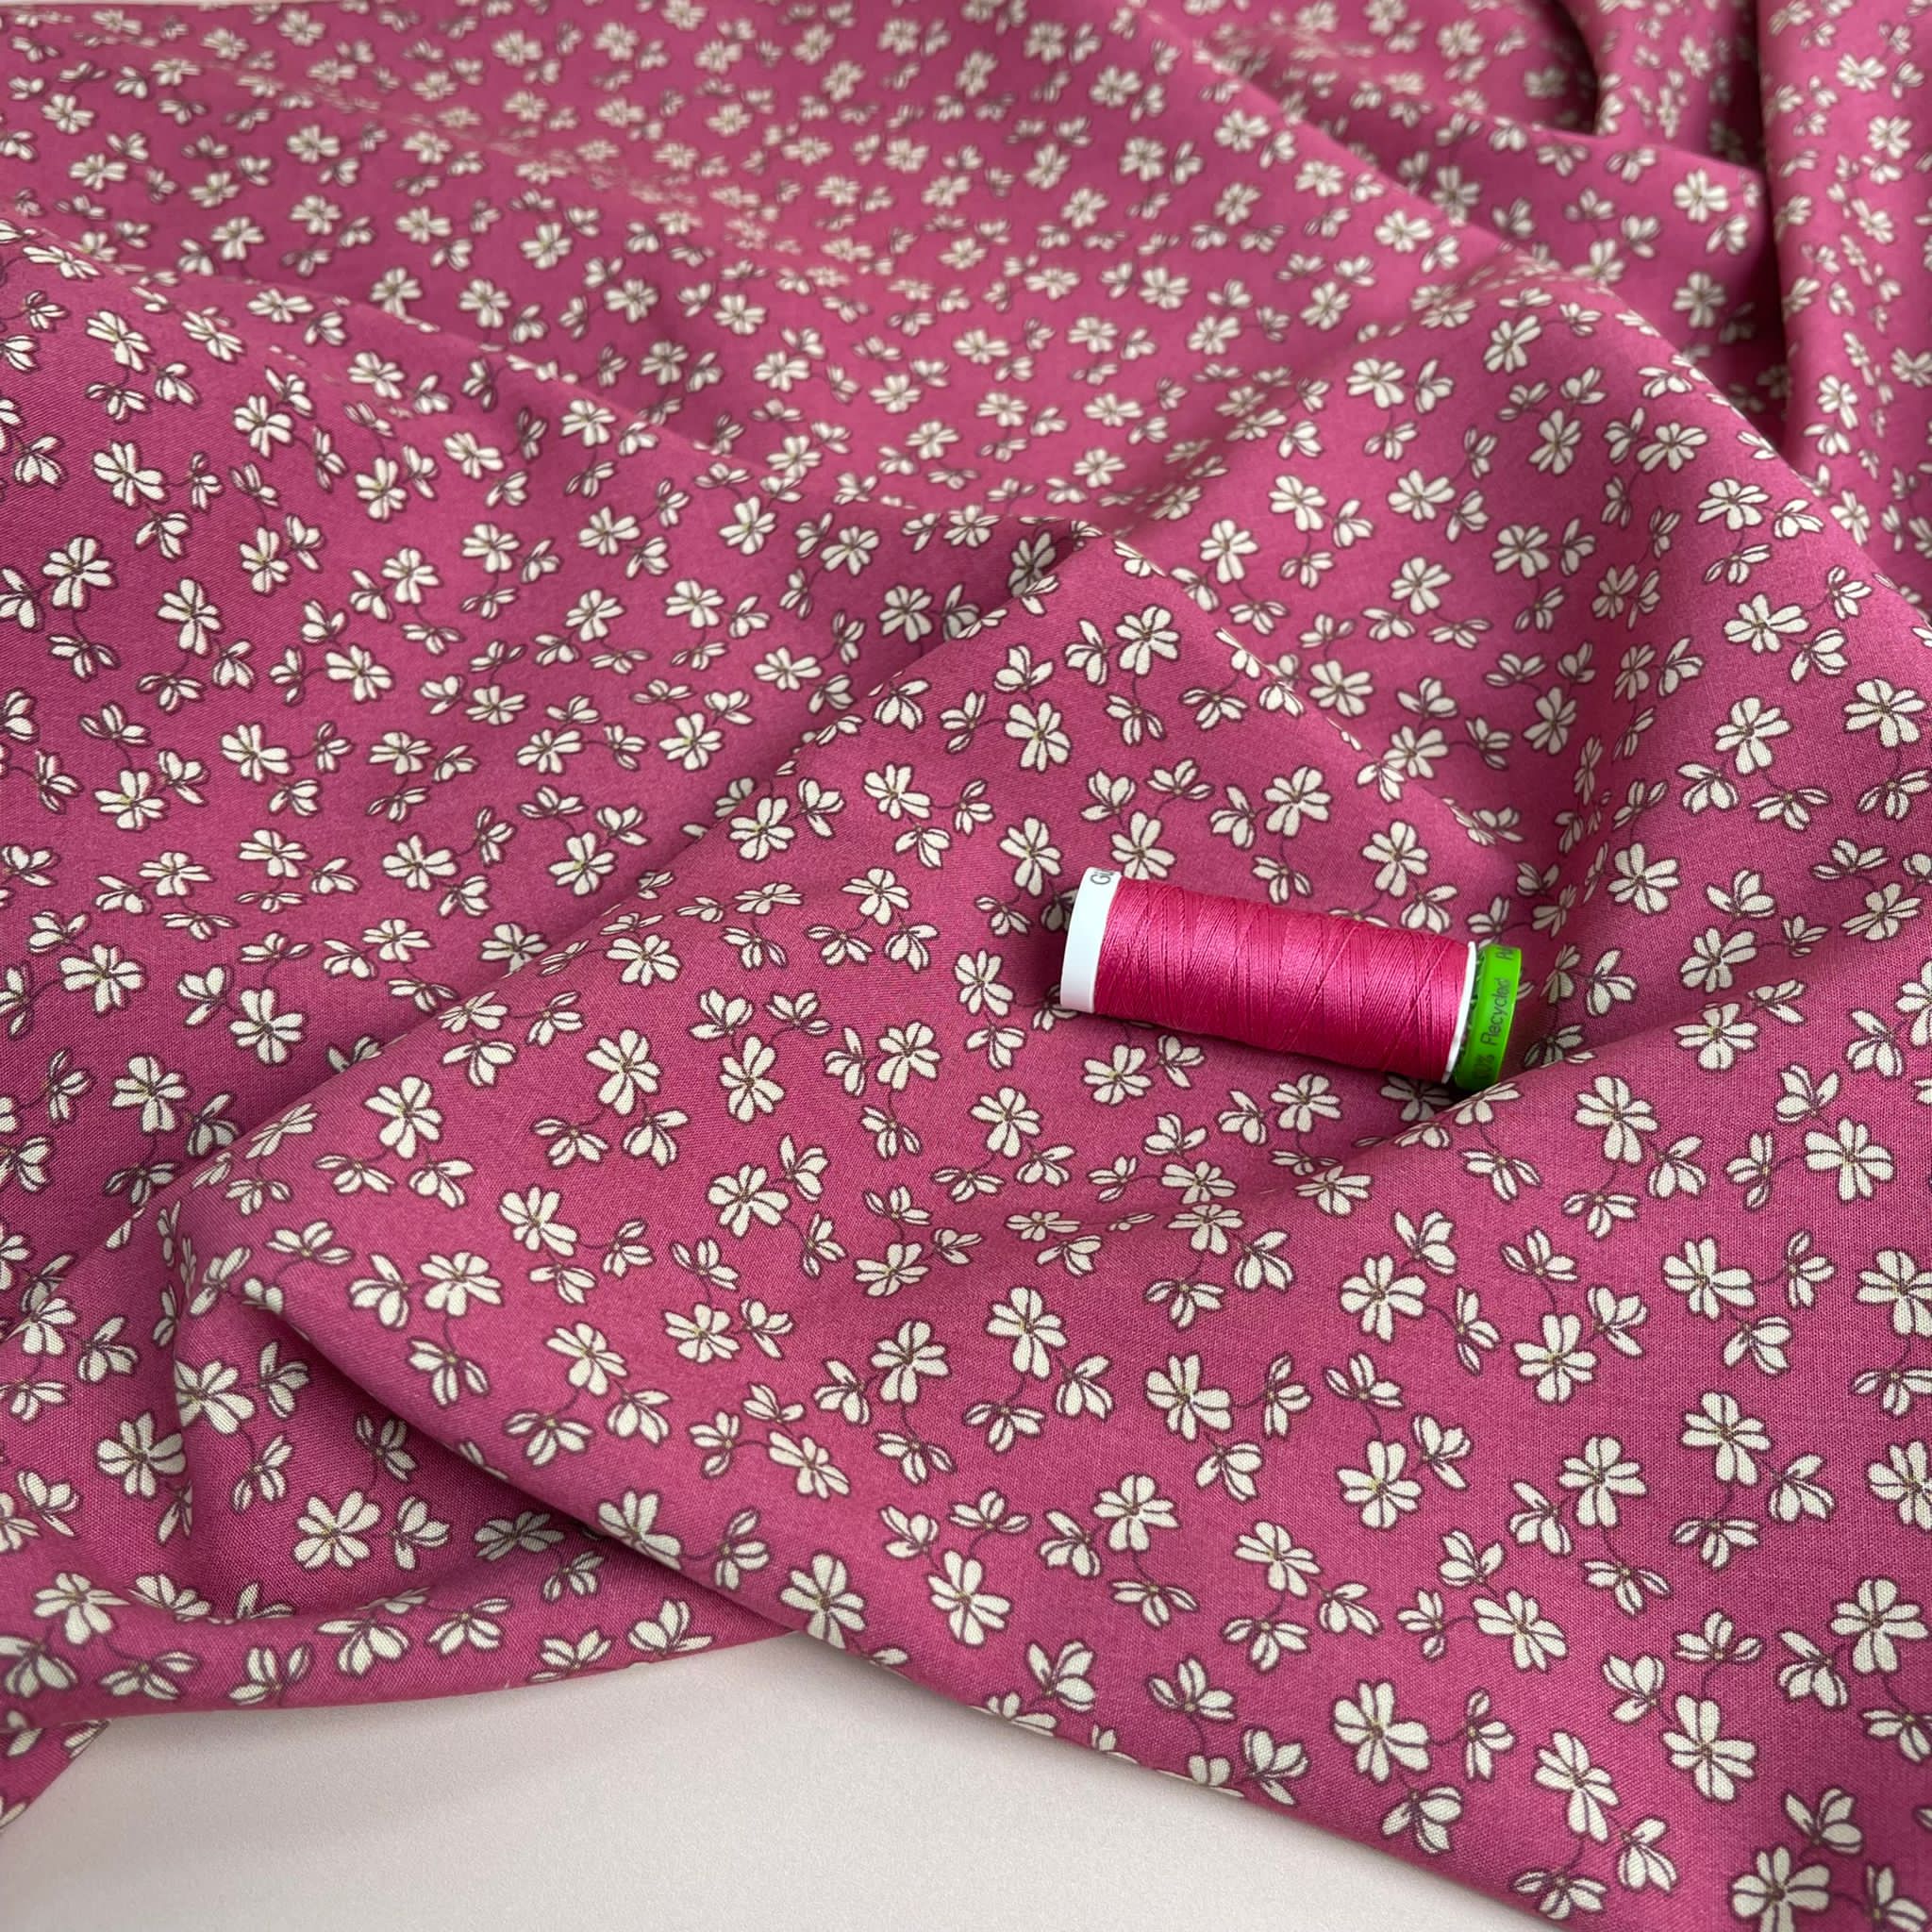 REMNANT 0.9 Metre - Ditsy Clover on Pink Viscose Poplin Fabric